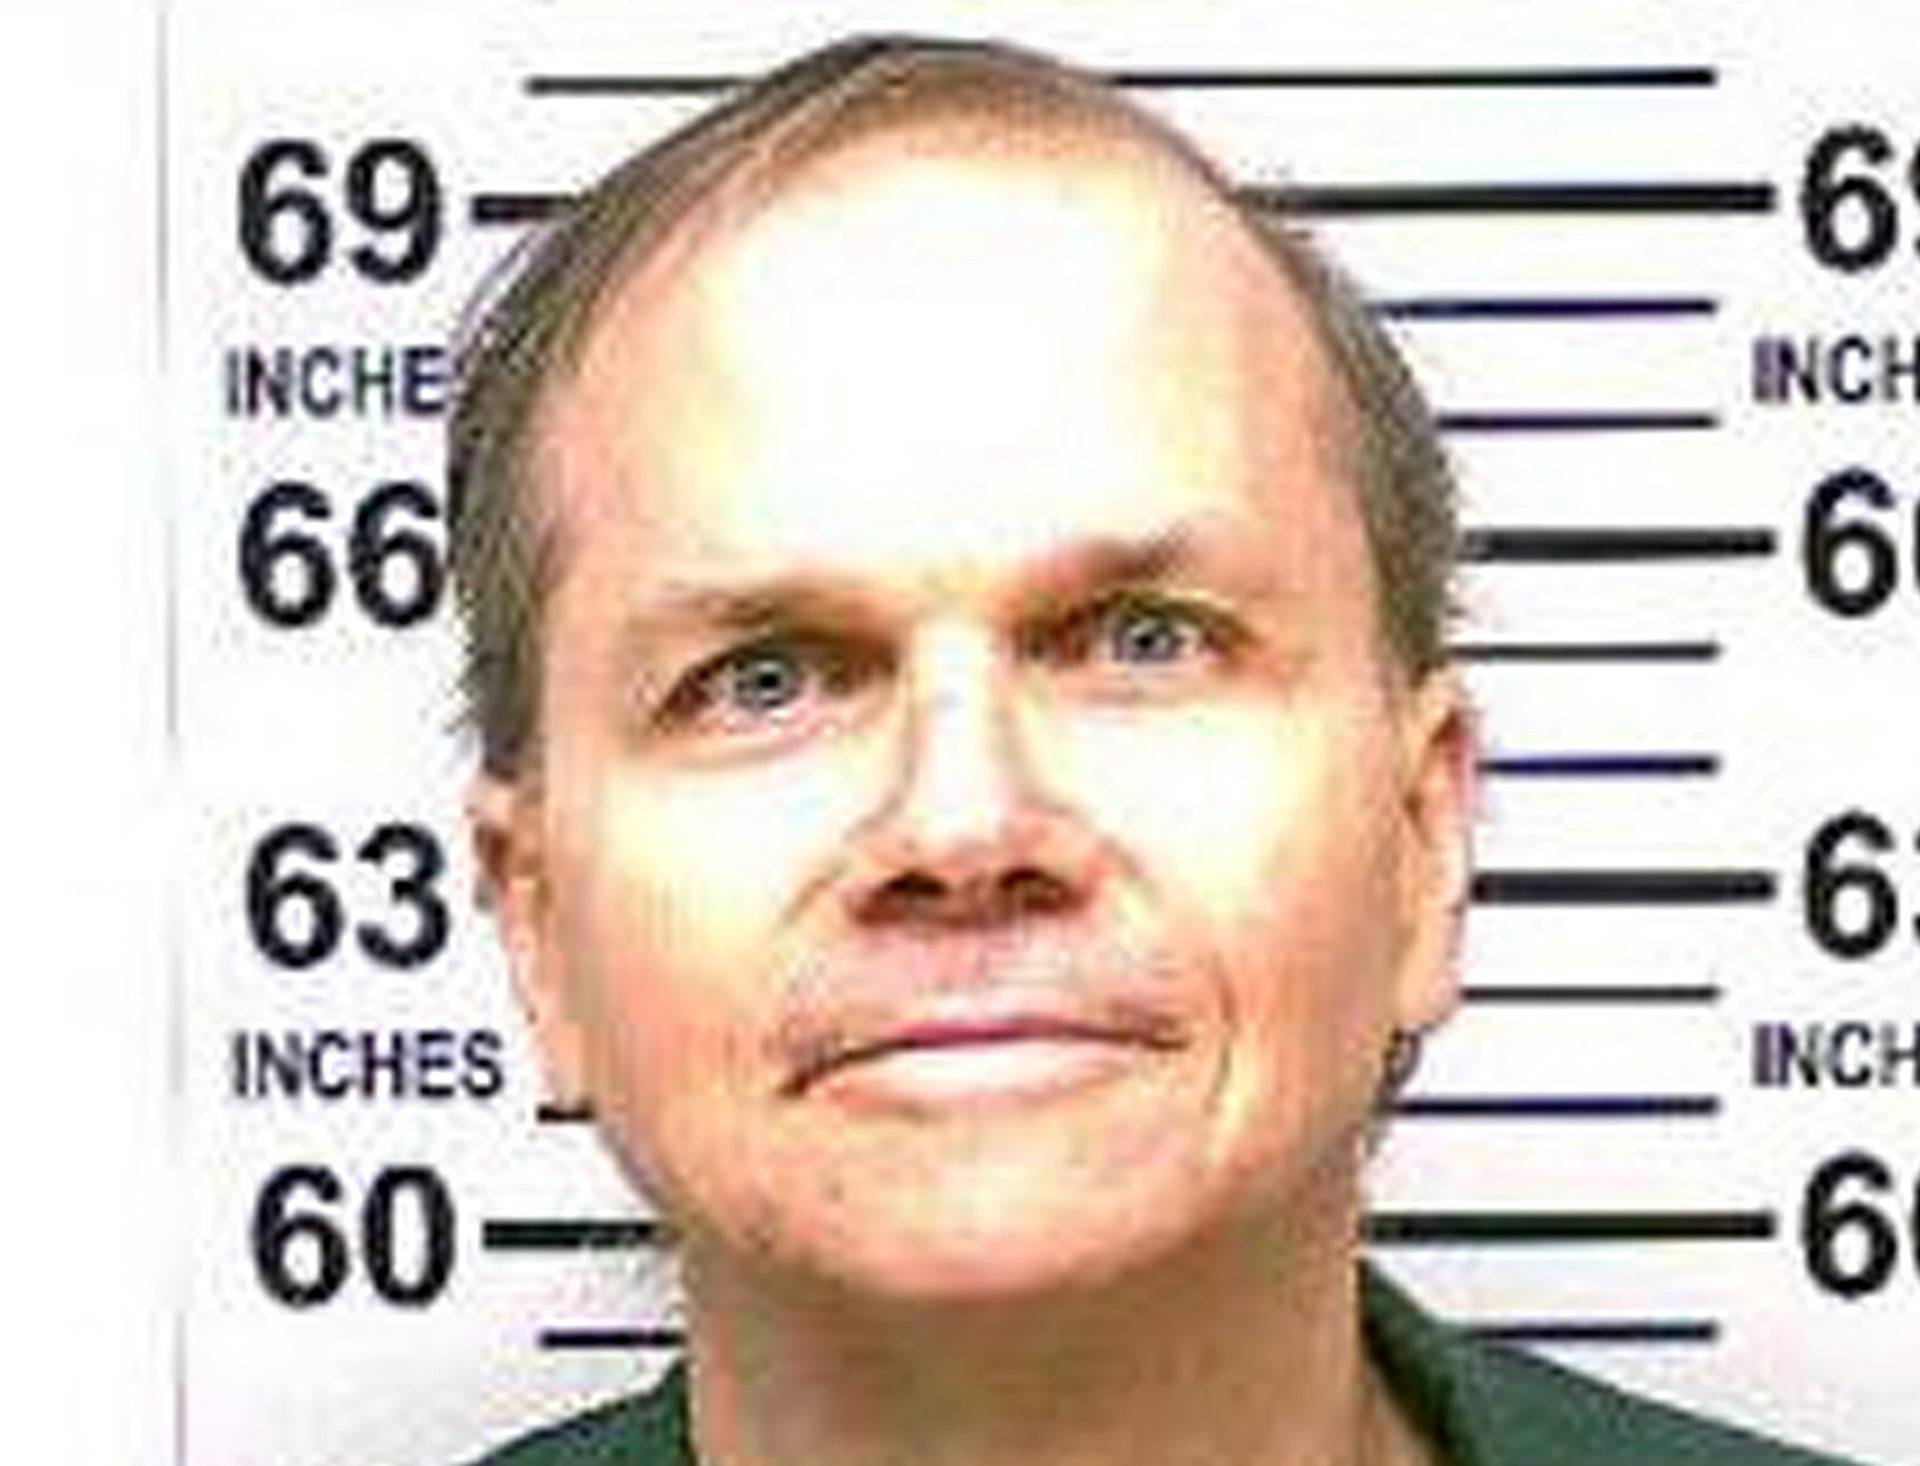 New York State Department of Corrections and Community Supervision 2018 photo of Mark David Chapman who murdered John Lennon in 1980